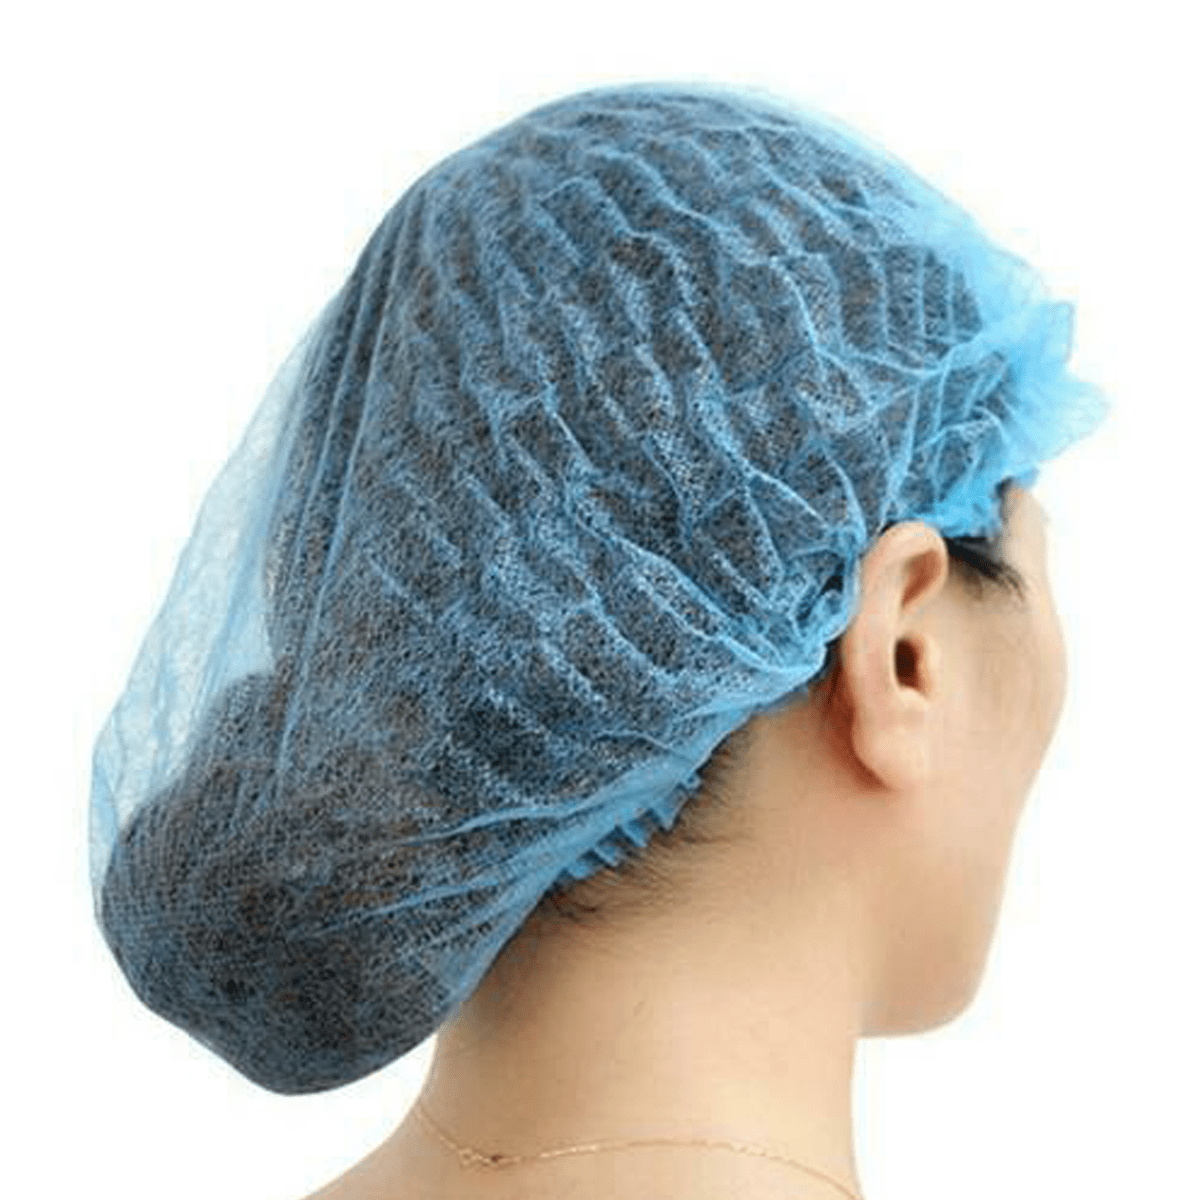 Blue Mesh Mob Hair Nets for catering Suntanning salons XMAS Parties Head Covers 